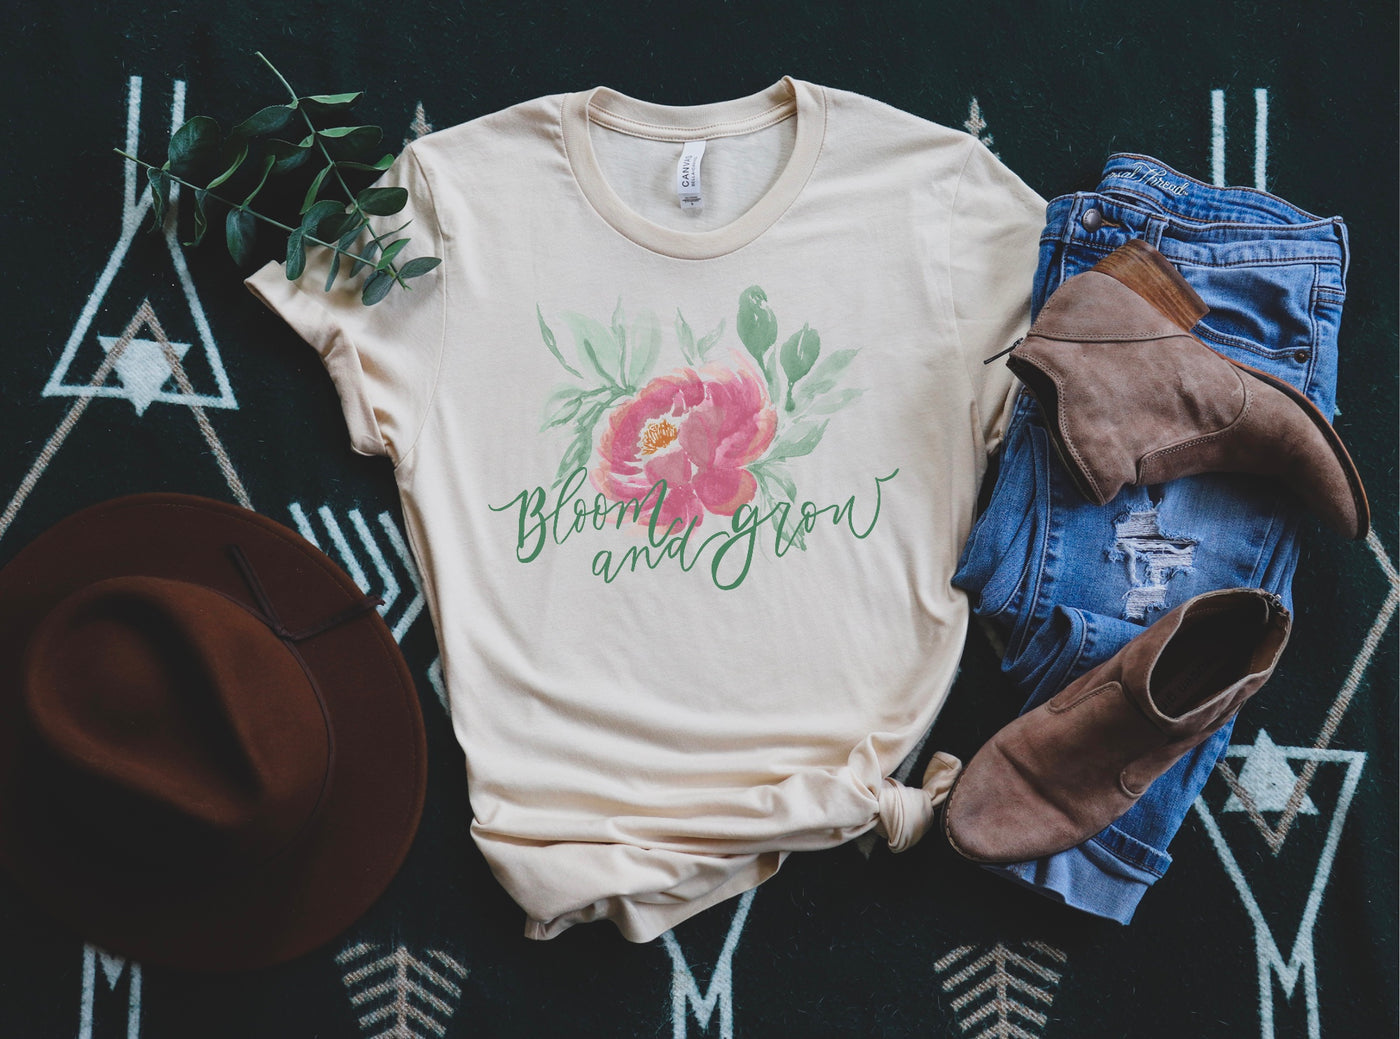 Baby pink Tee with graphic has a watercolor style pink flower with green leaves and the words Bloom and Grow in green.